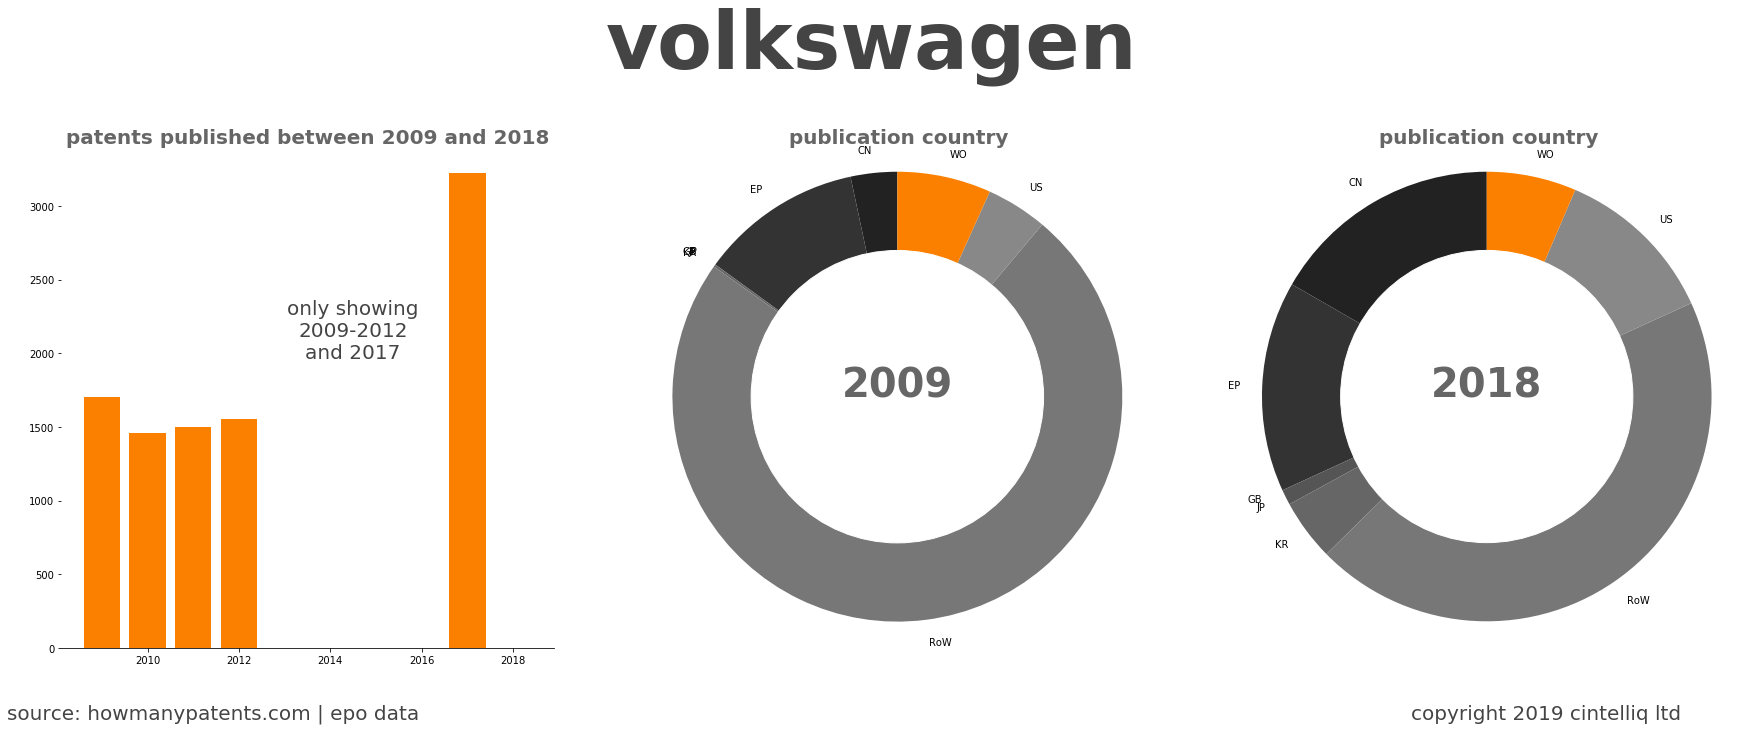 summary of patents for Volkswagen